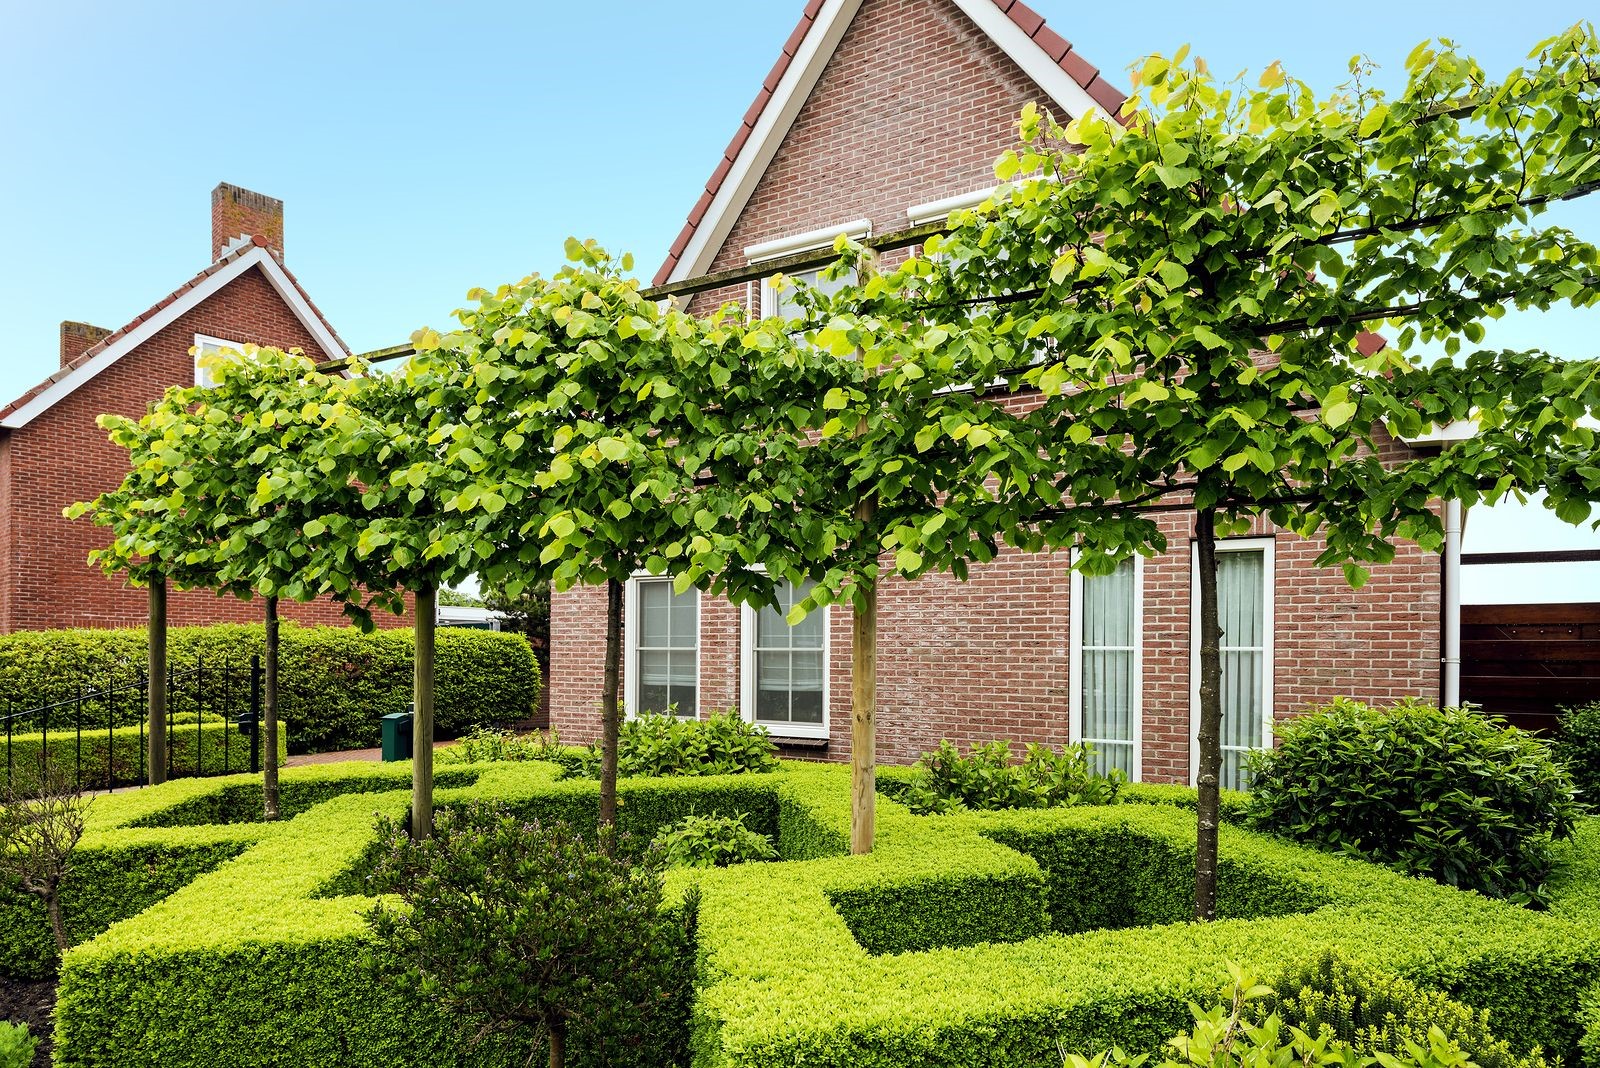 A Small Yard or Lawn Can Look Bigger with Effective Landscaping Ideas